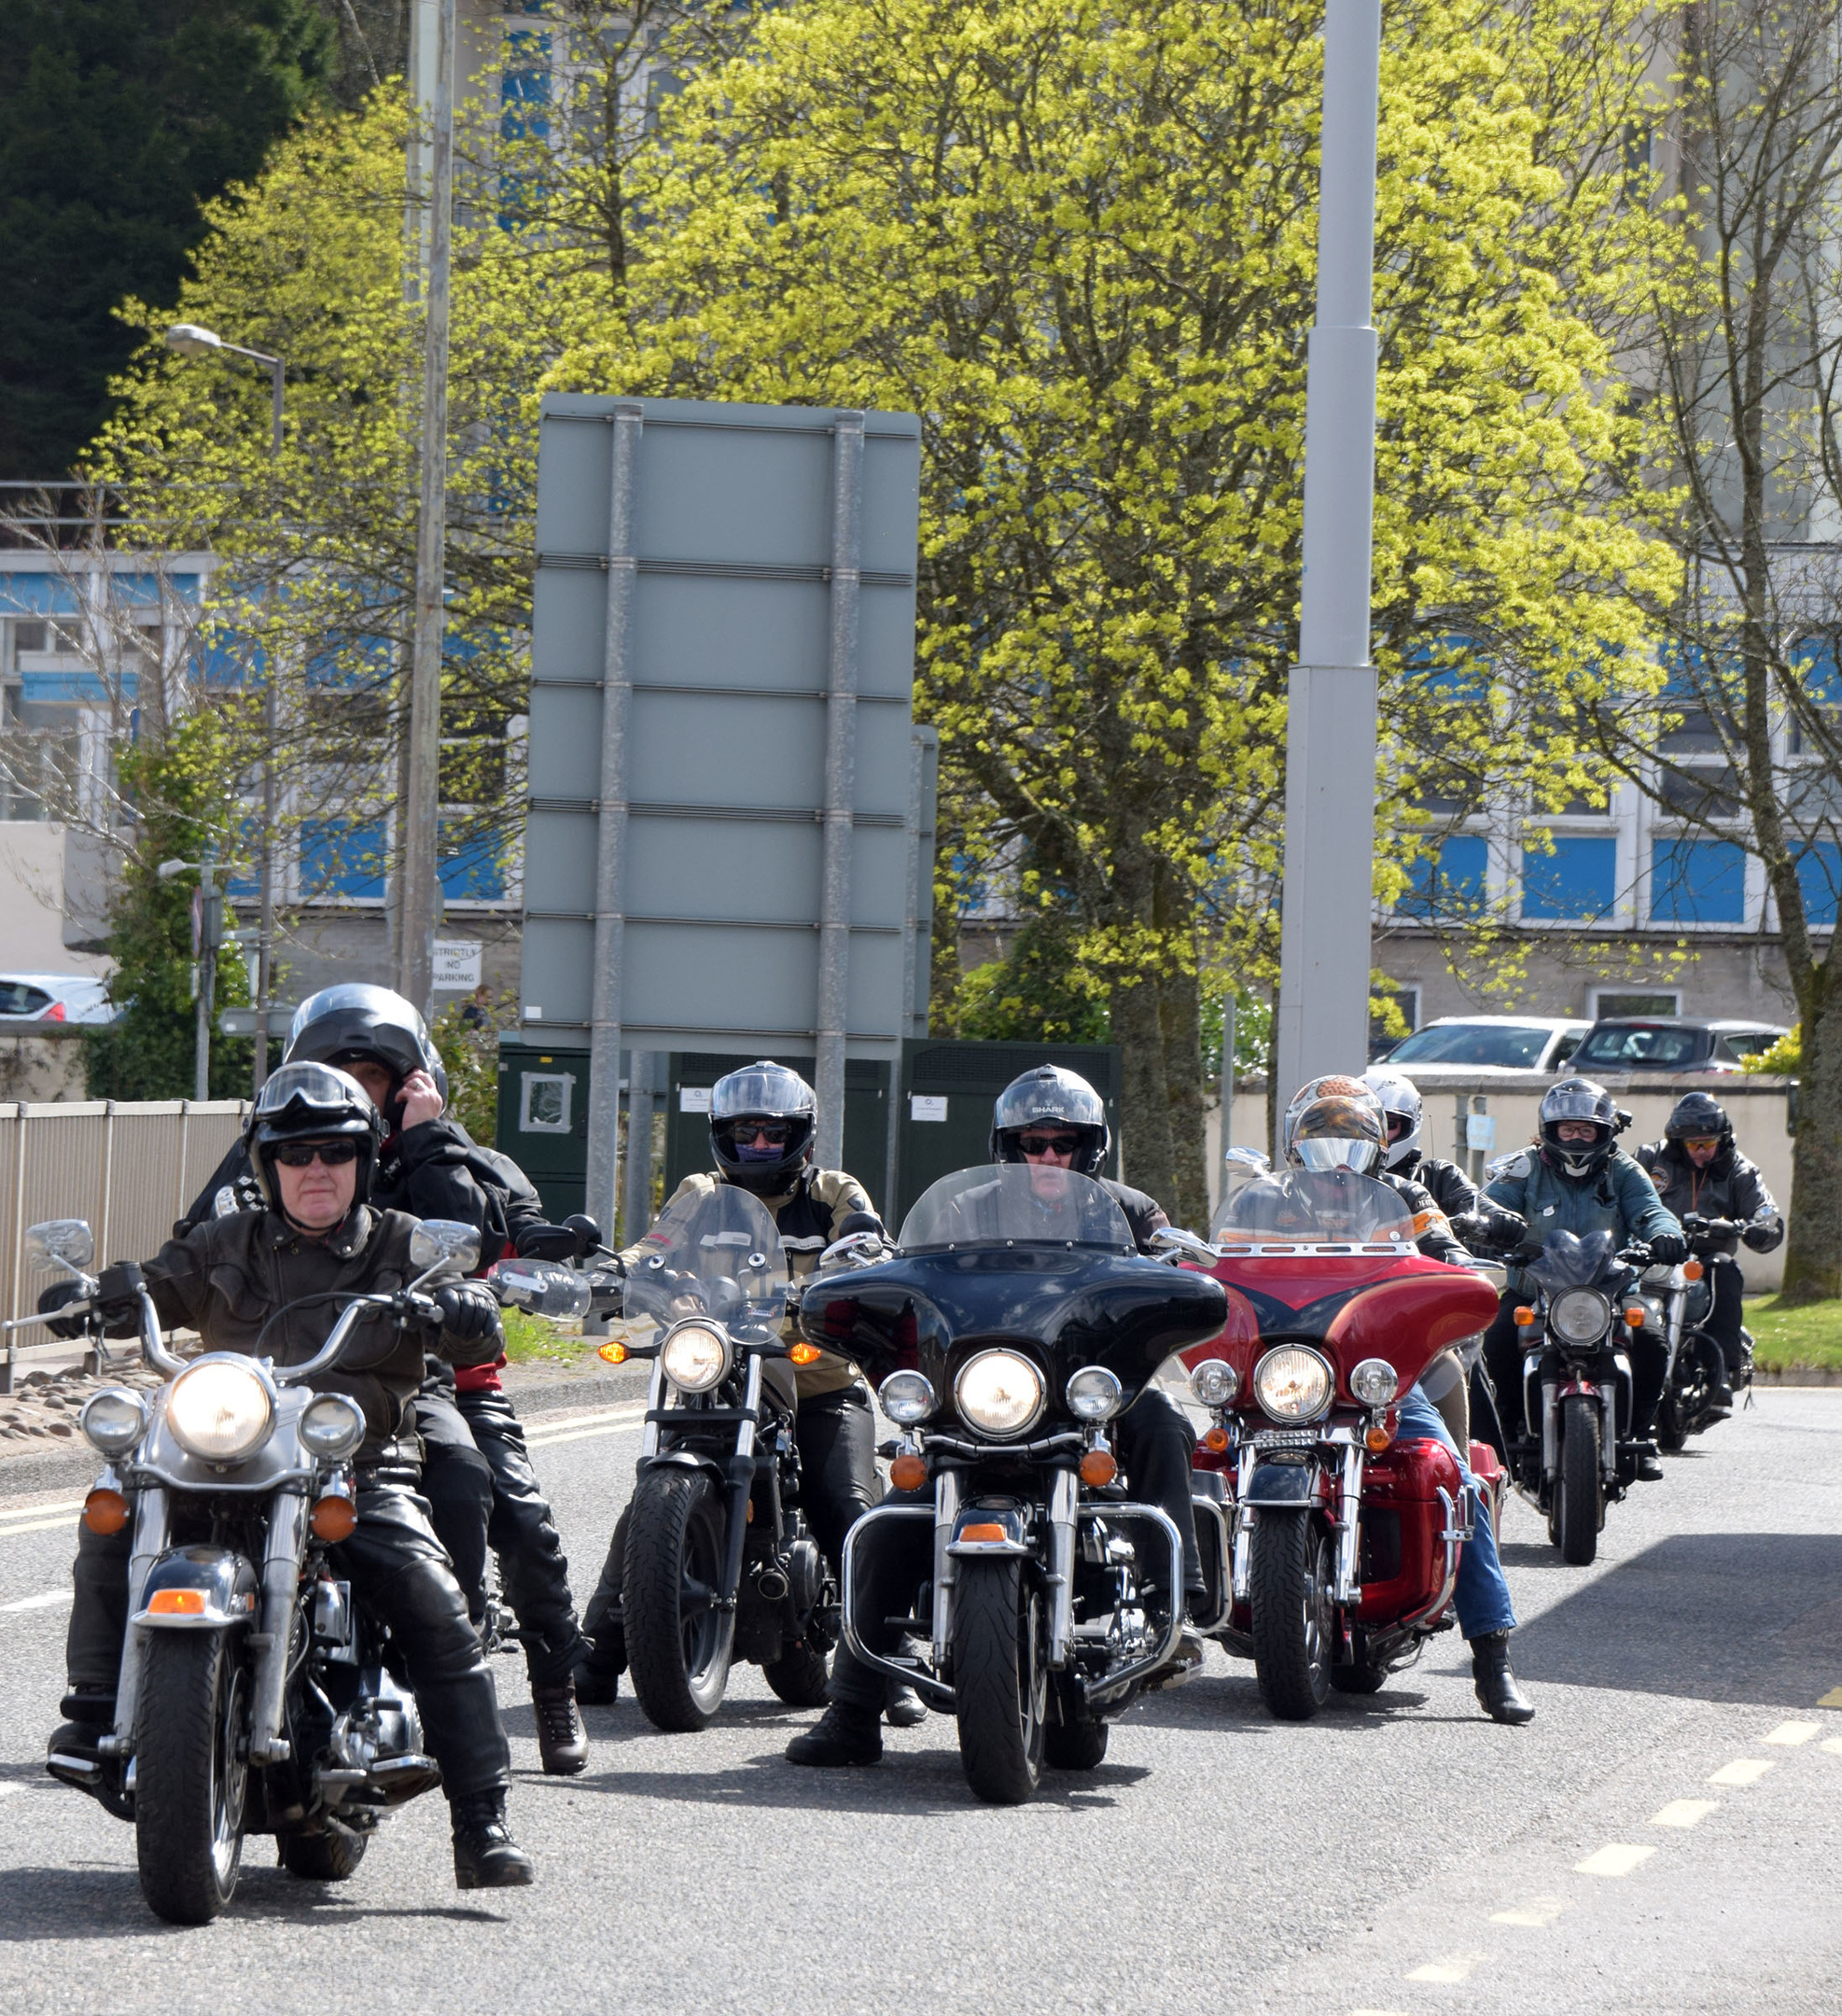 Harley owners parade through Fort William in the town’s ’Rumble Under the Ben’ Harley Davidson rally.